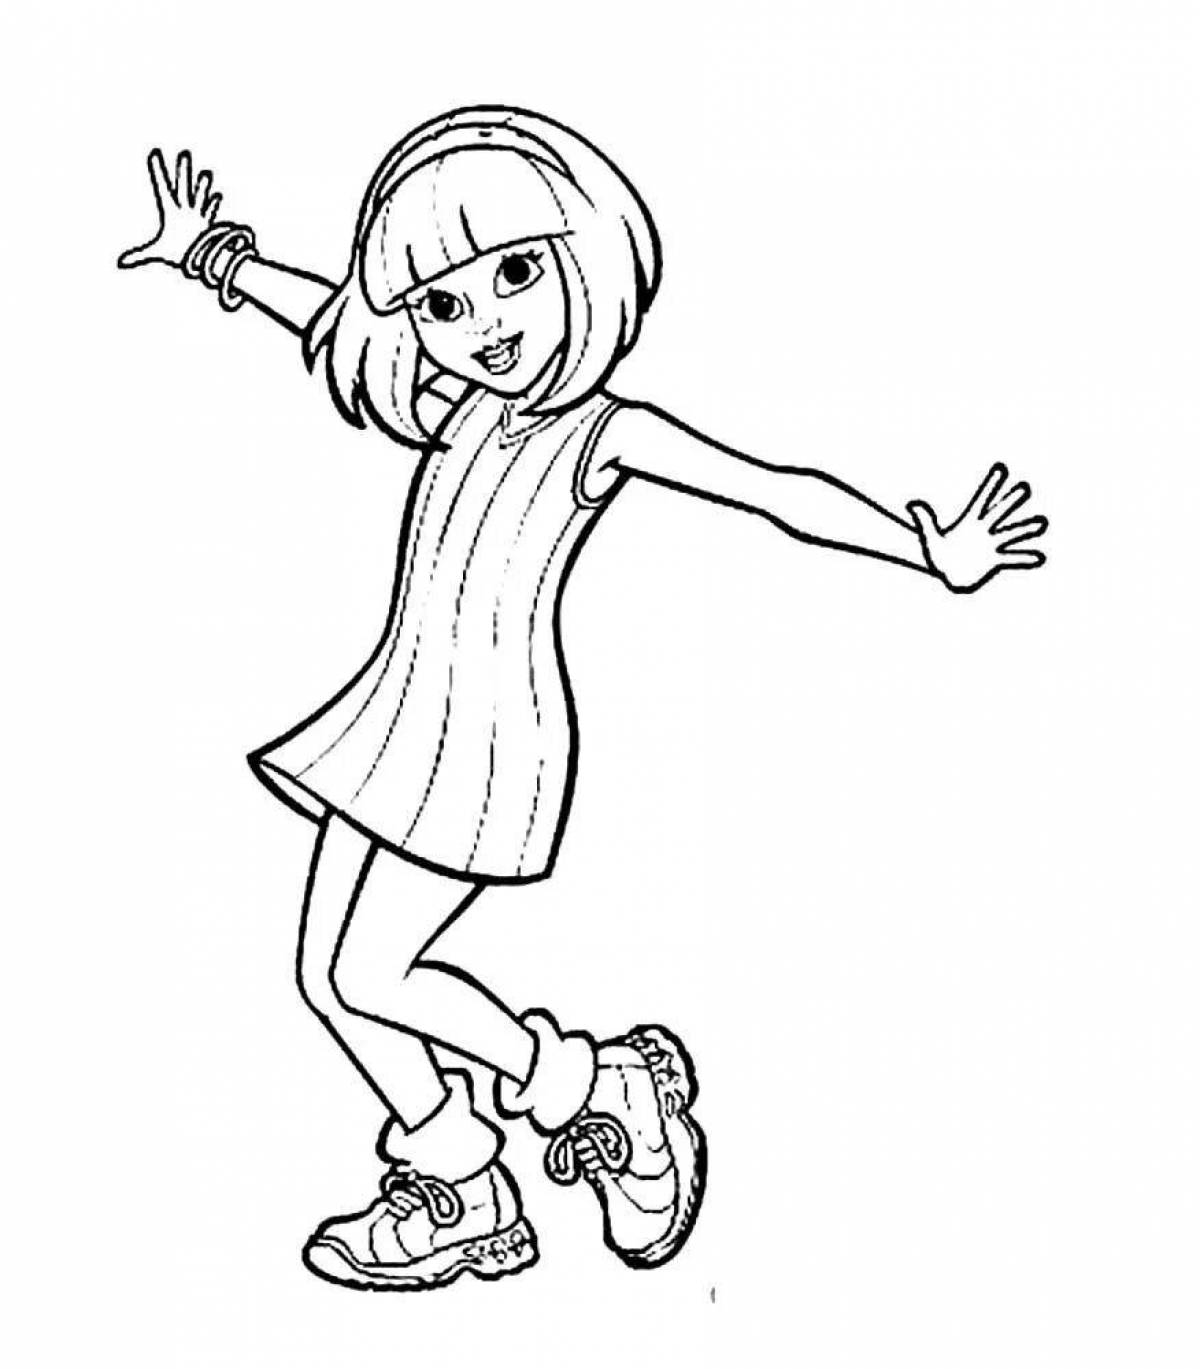 Coloring page charming dancing girl